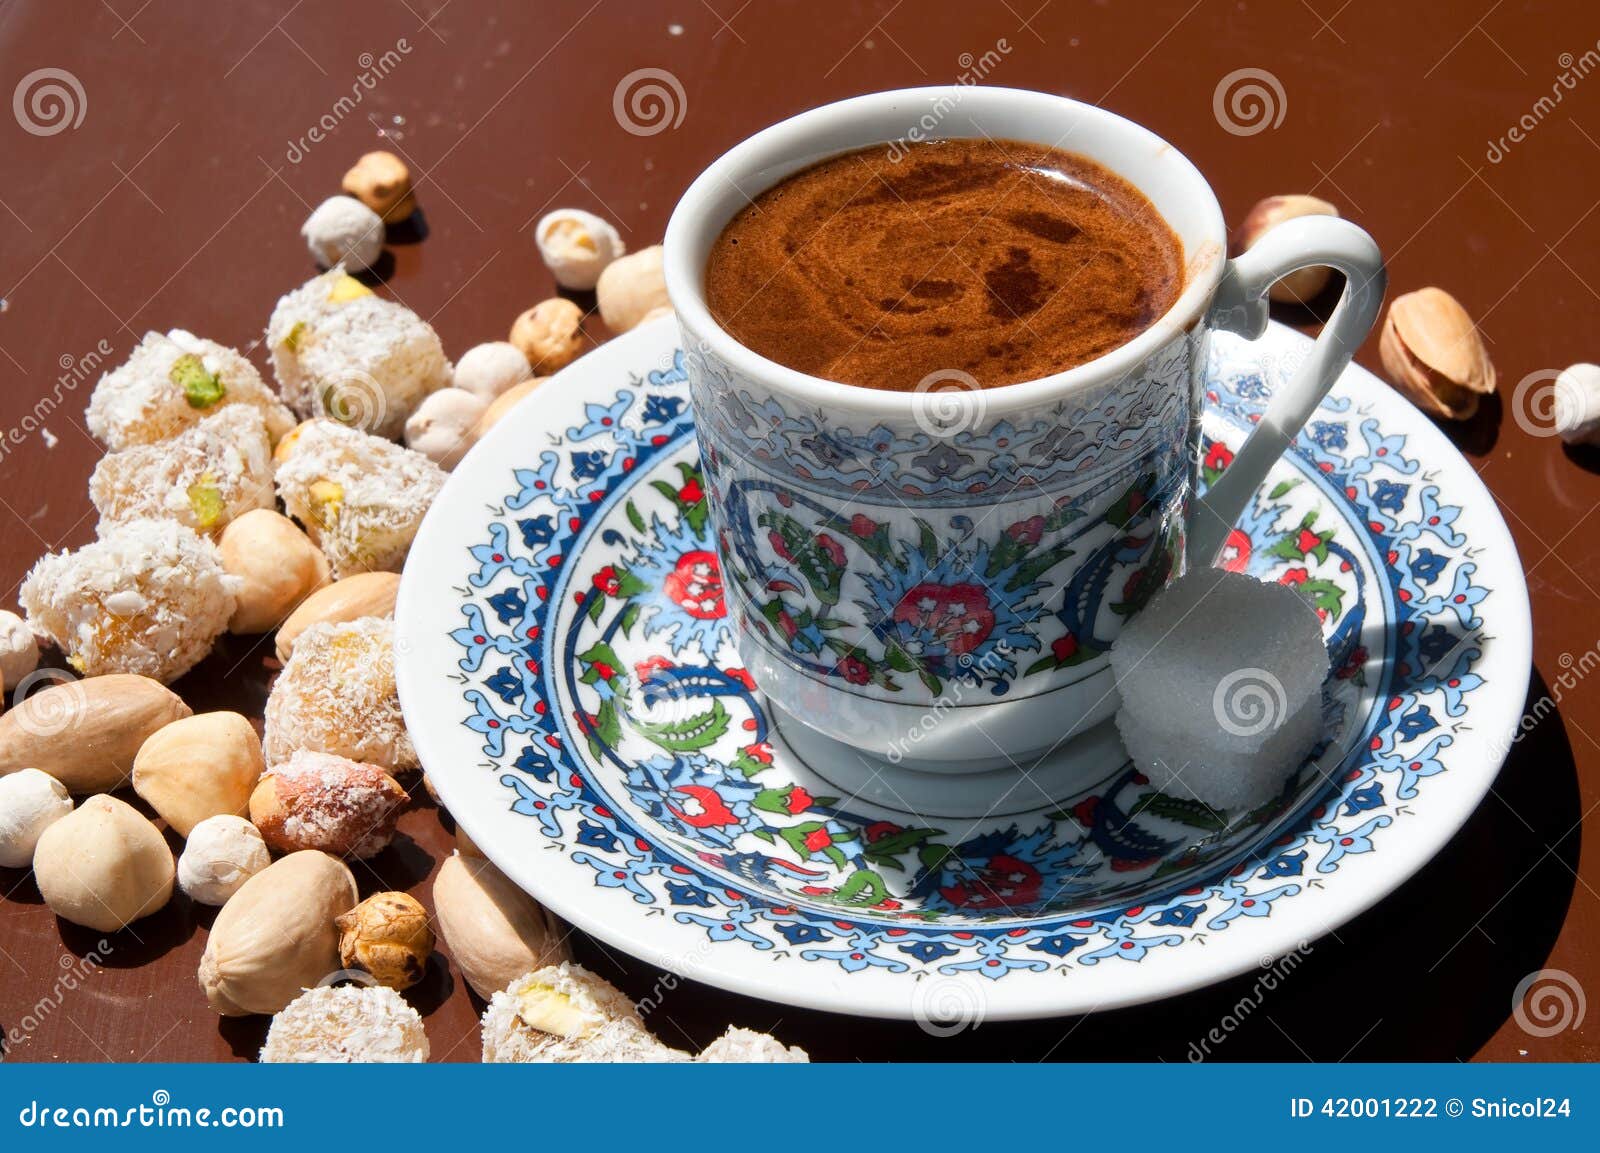 turkish coffee and delights